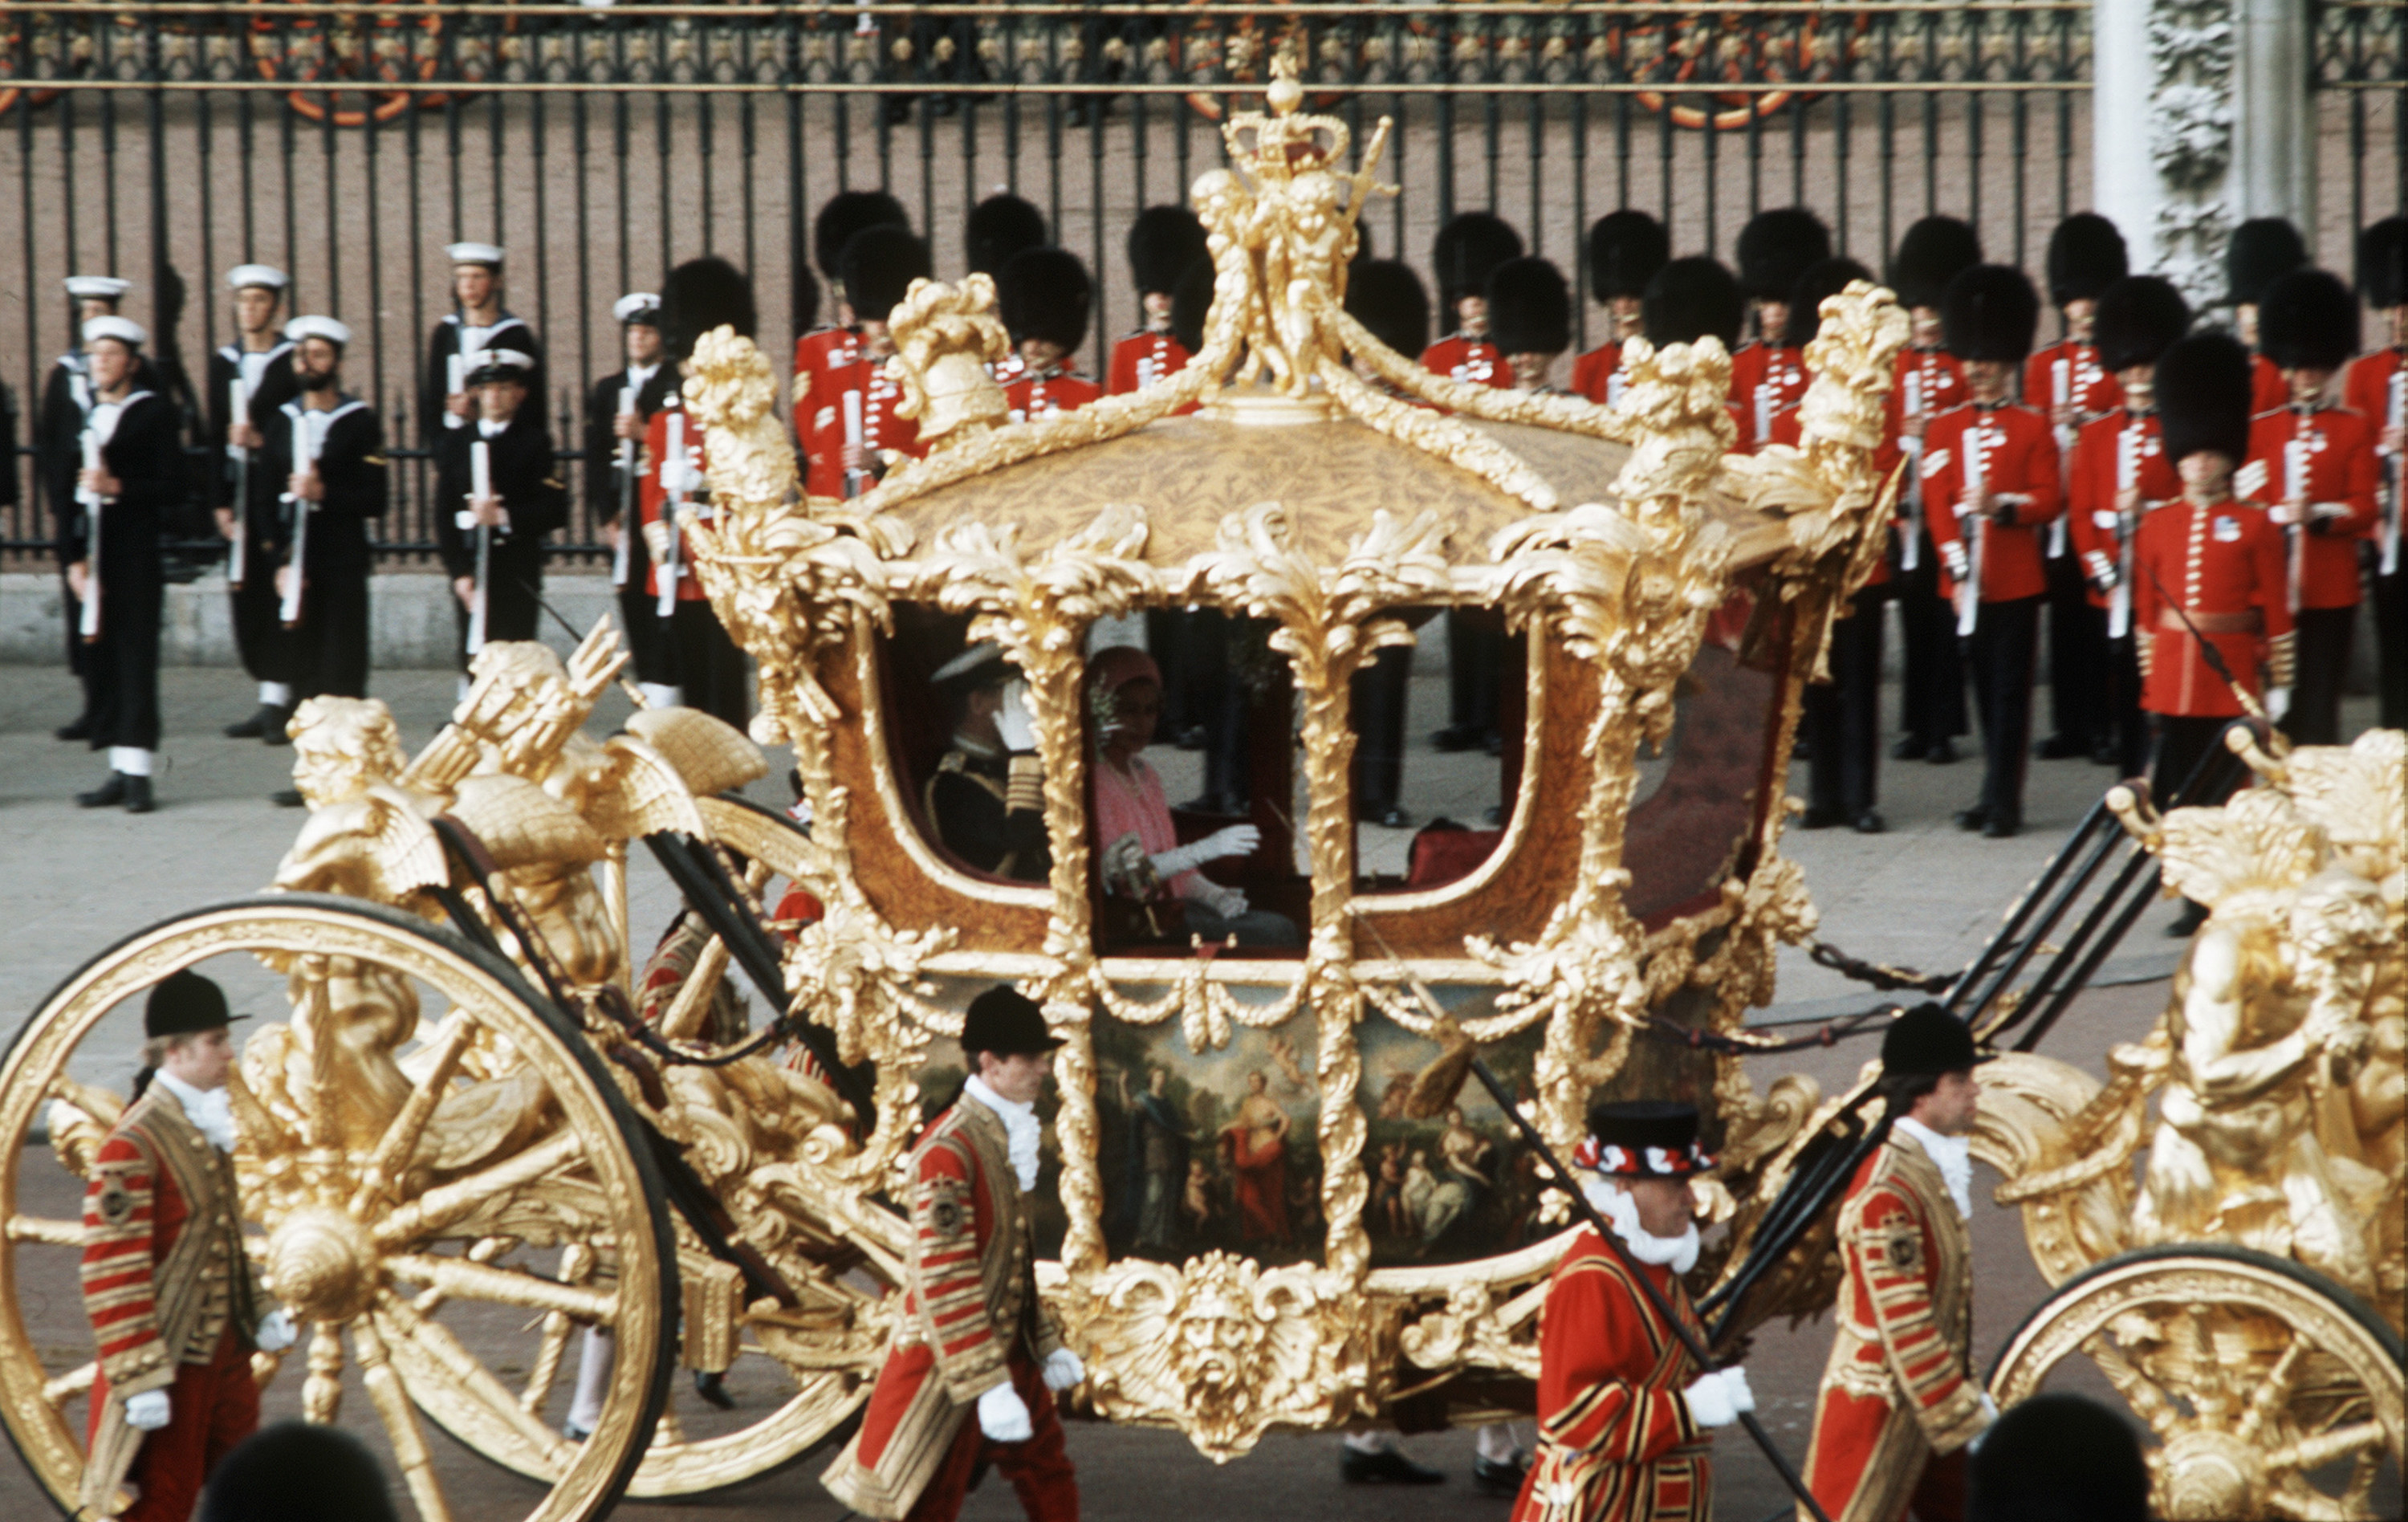 Queen Elizabeth II and price philip on a golden carriage with soldiers behind them 